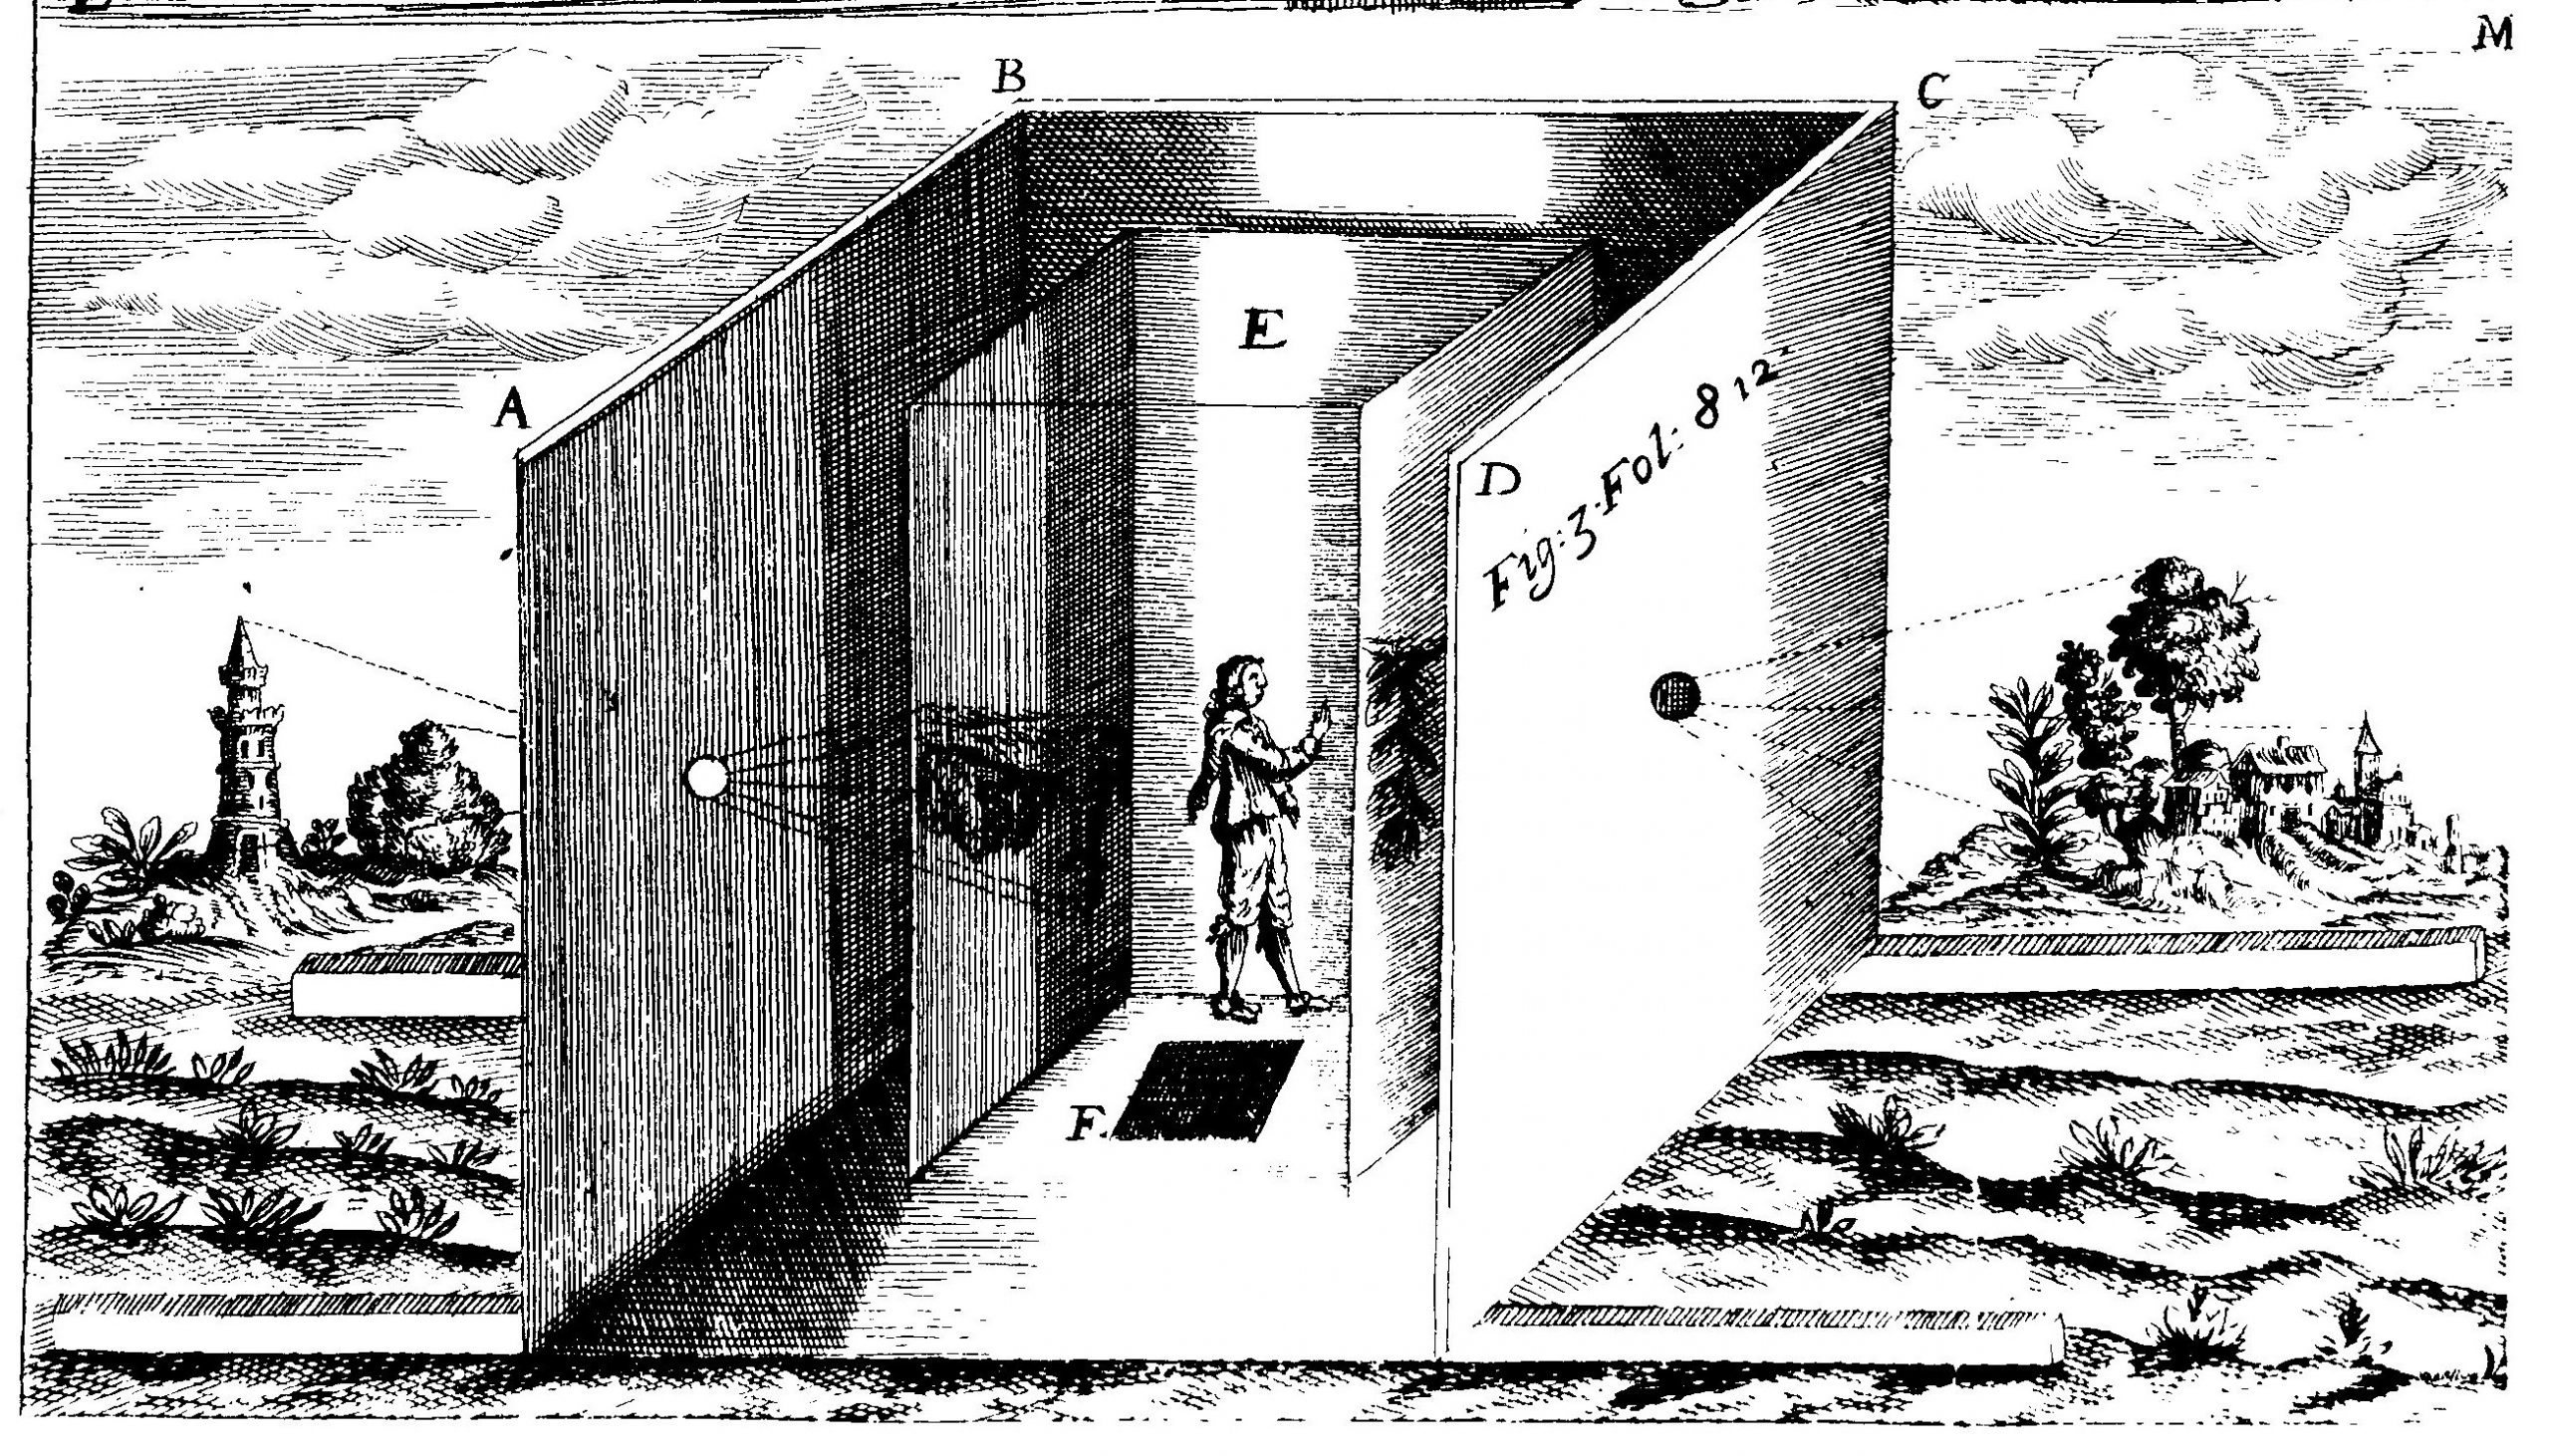 Diagram of a cutaway room in a landscape. A person traces images projected through a small hole in the wall onto a large surface. Another hole on the opposite wall projects an additional image upside down on an additional large surface behind the person.